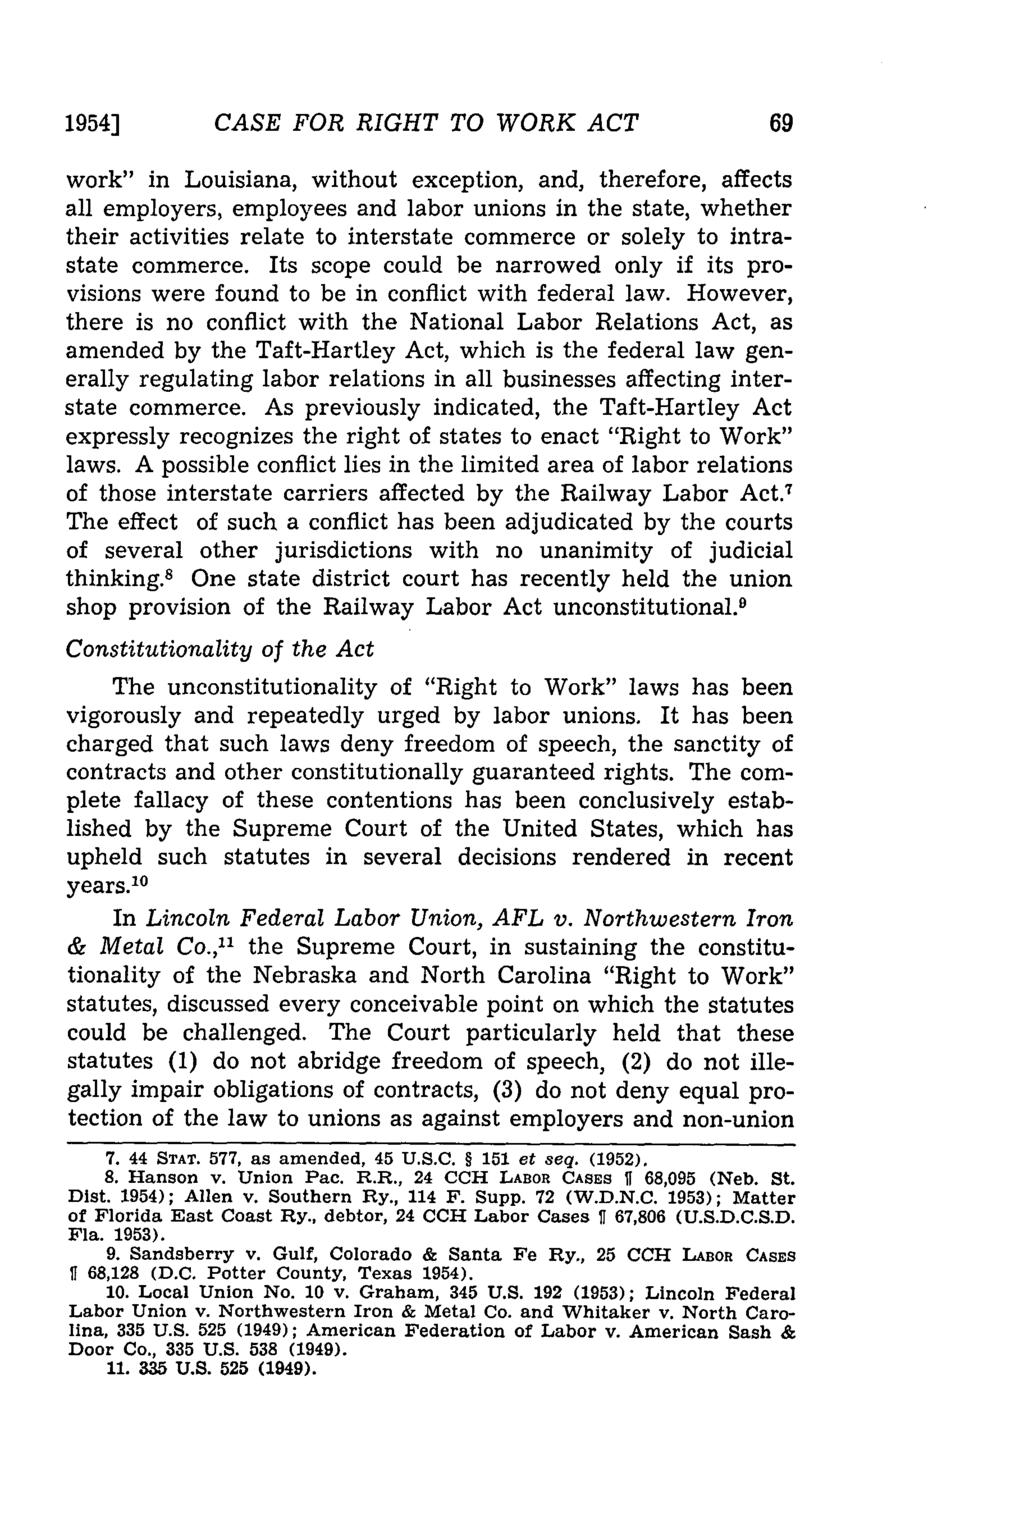 19541 CASE FOR RIGHT TO WORK ACT work" in Louisiana, without exception, and, therefore, affects all employers, employees and labor unions in the state, whether their activities relate to interstate